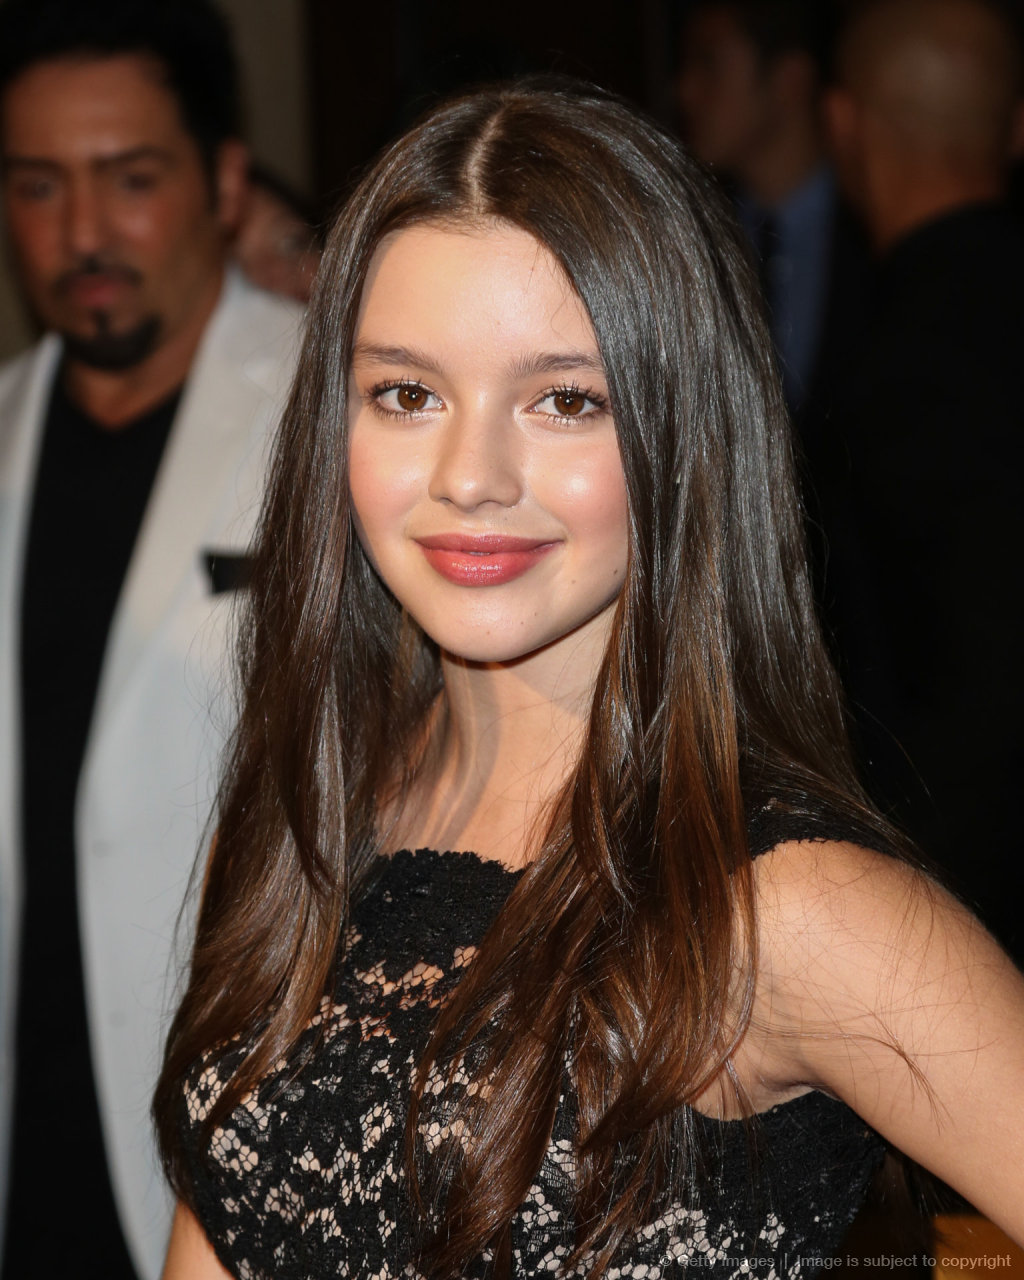 Actress Fatima Ptacek at the 28th annual Imagen Awards - Beverly Hills, CA - August 16, 2013